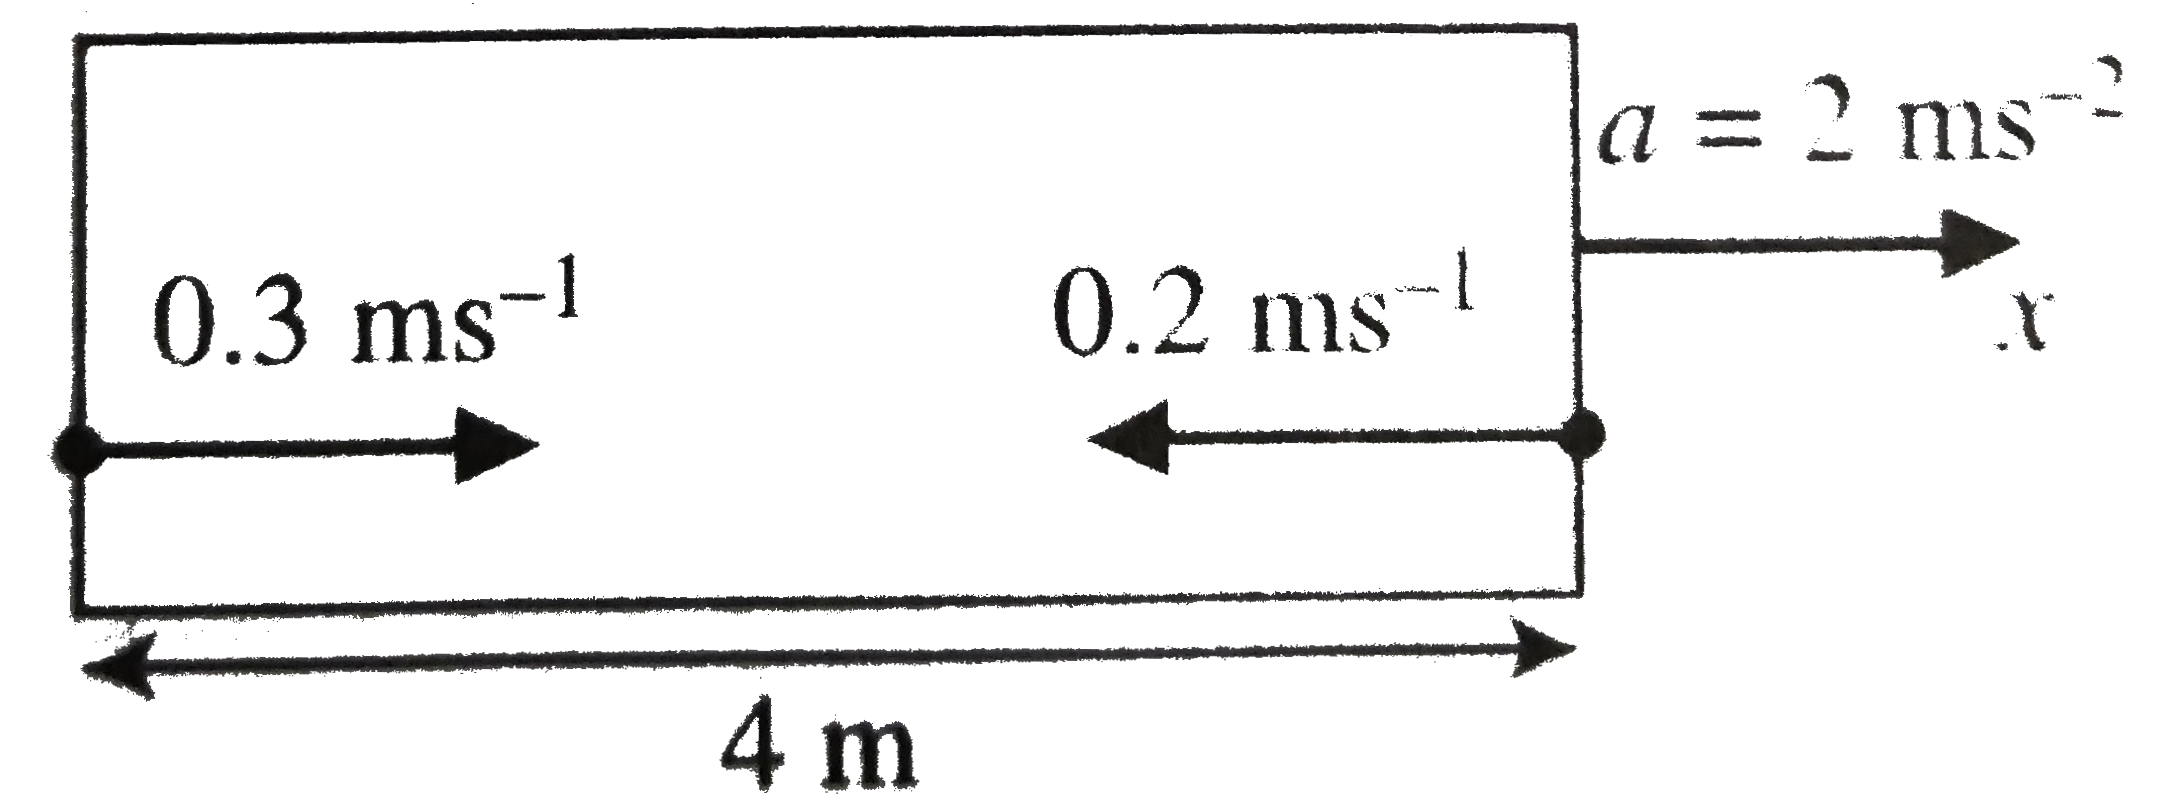 A rocket is moving in a gravity free space with a constant acceleration of 2 ms^(-2) along +x direction (see figure). The length of a chamber inside the rocket is 4 m. A ball is thrown from the left end of the chamber in +x direction with a speed of 0.3 ms^(-1) from its right end relative to the rocket. The time in seconds when the two balls hit each other is